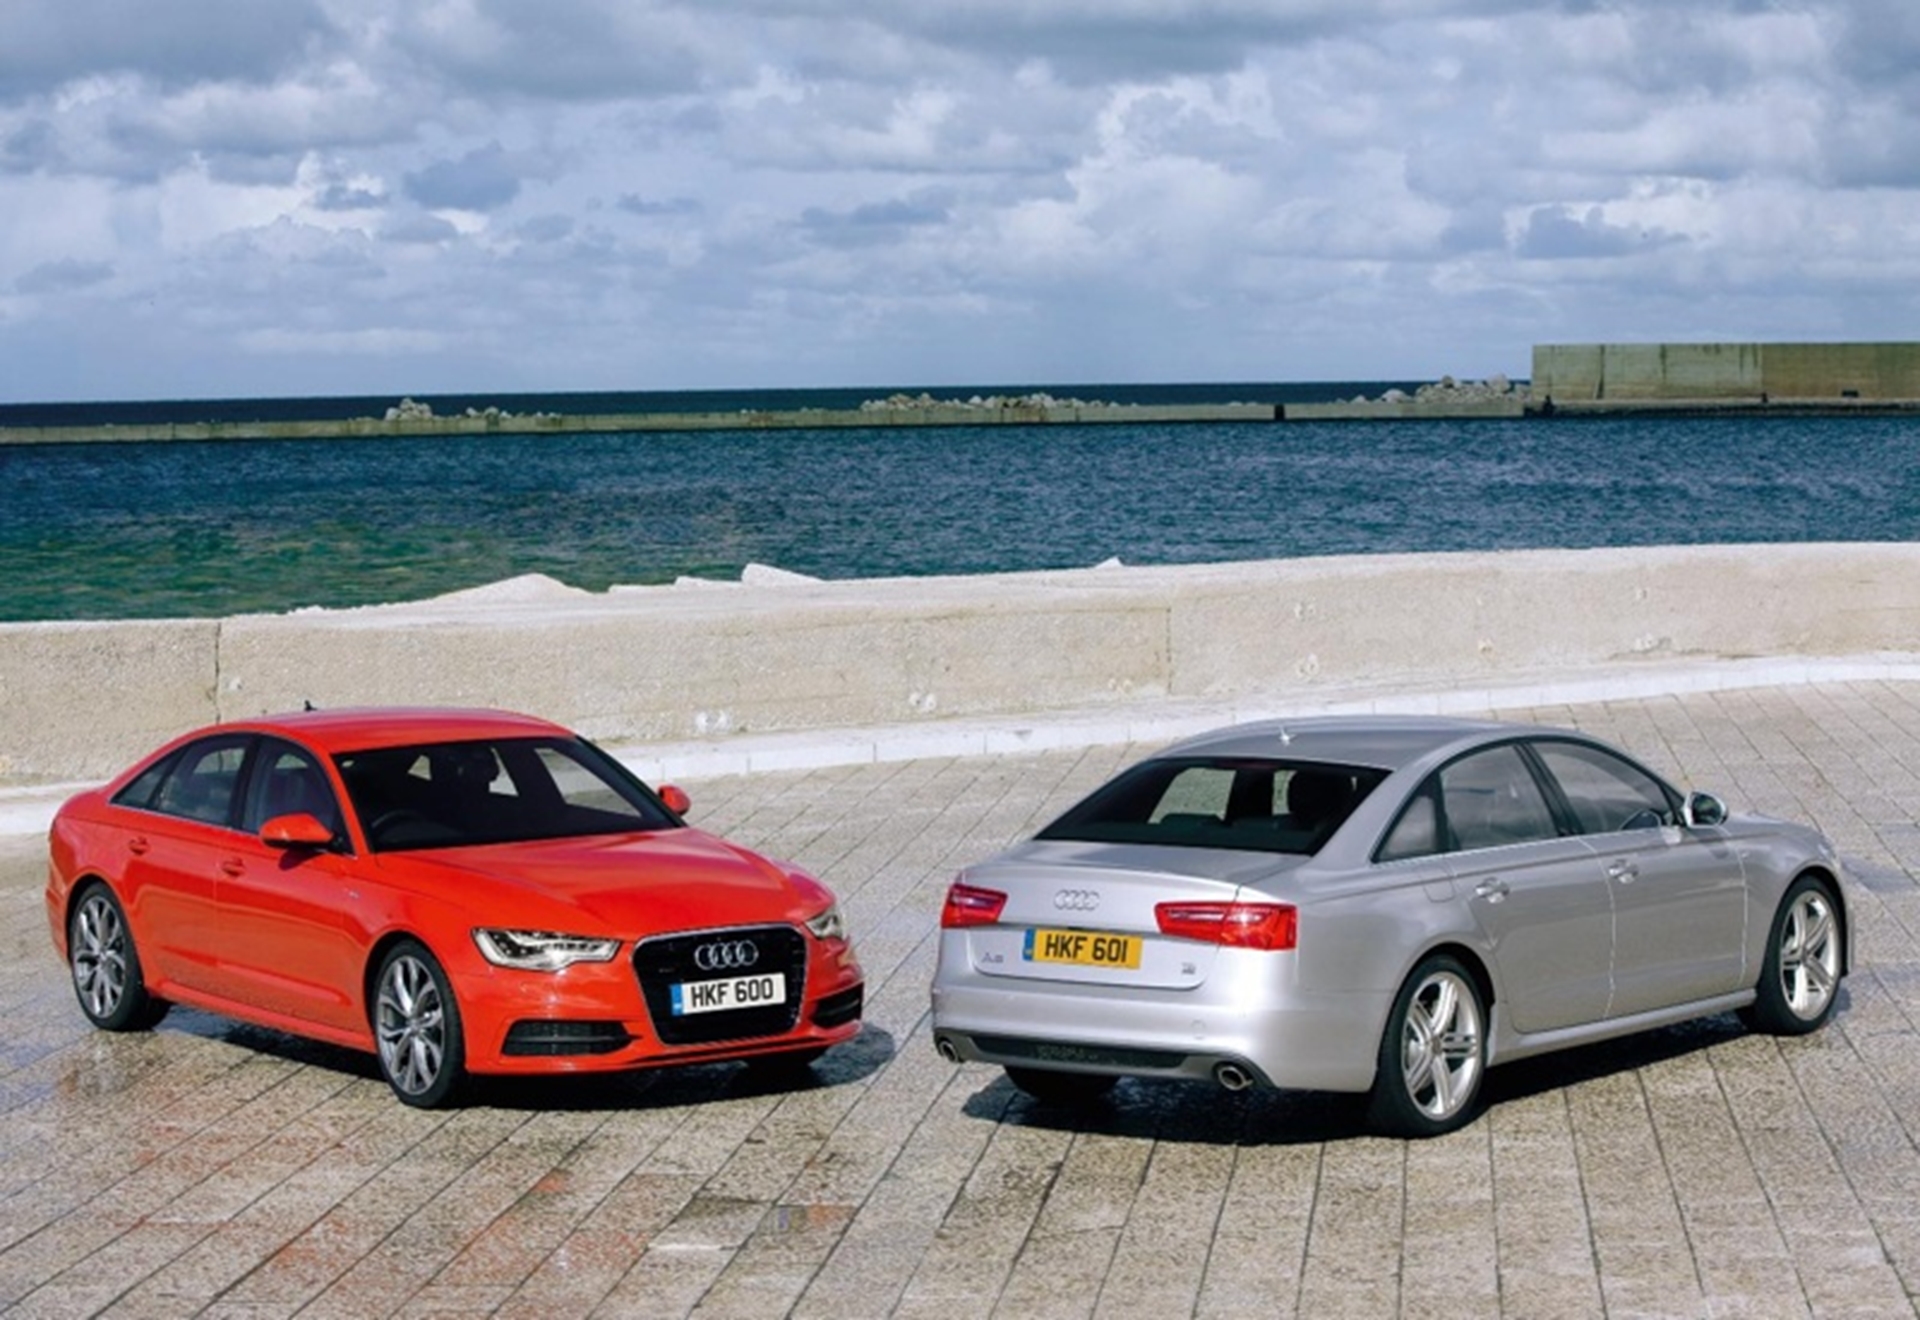 AUDI A6 SALOON IS CROWNED BEST PREMIUM EXECUTIVE CAR IN PARKERS NEW CAR AWARDS